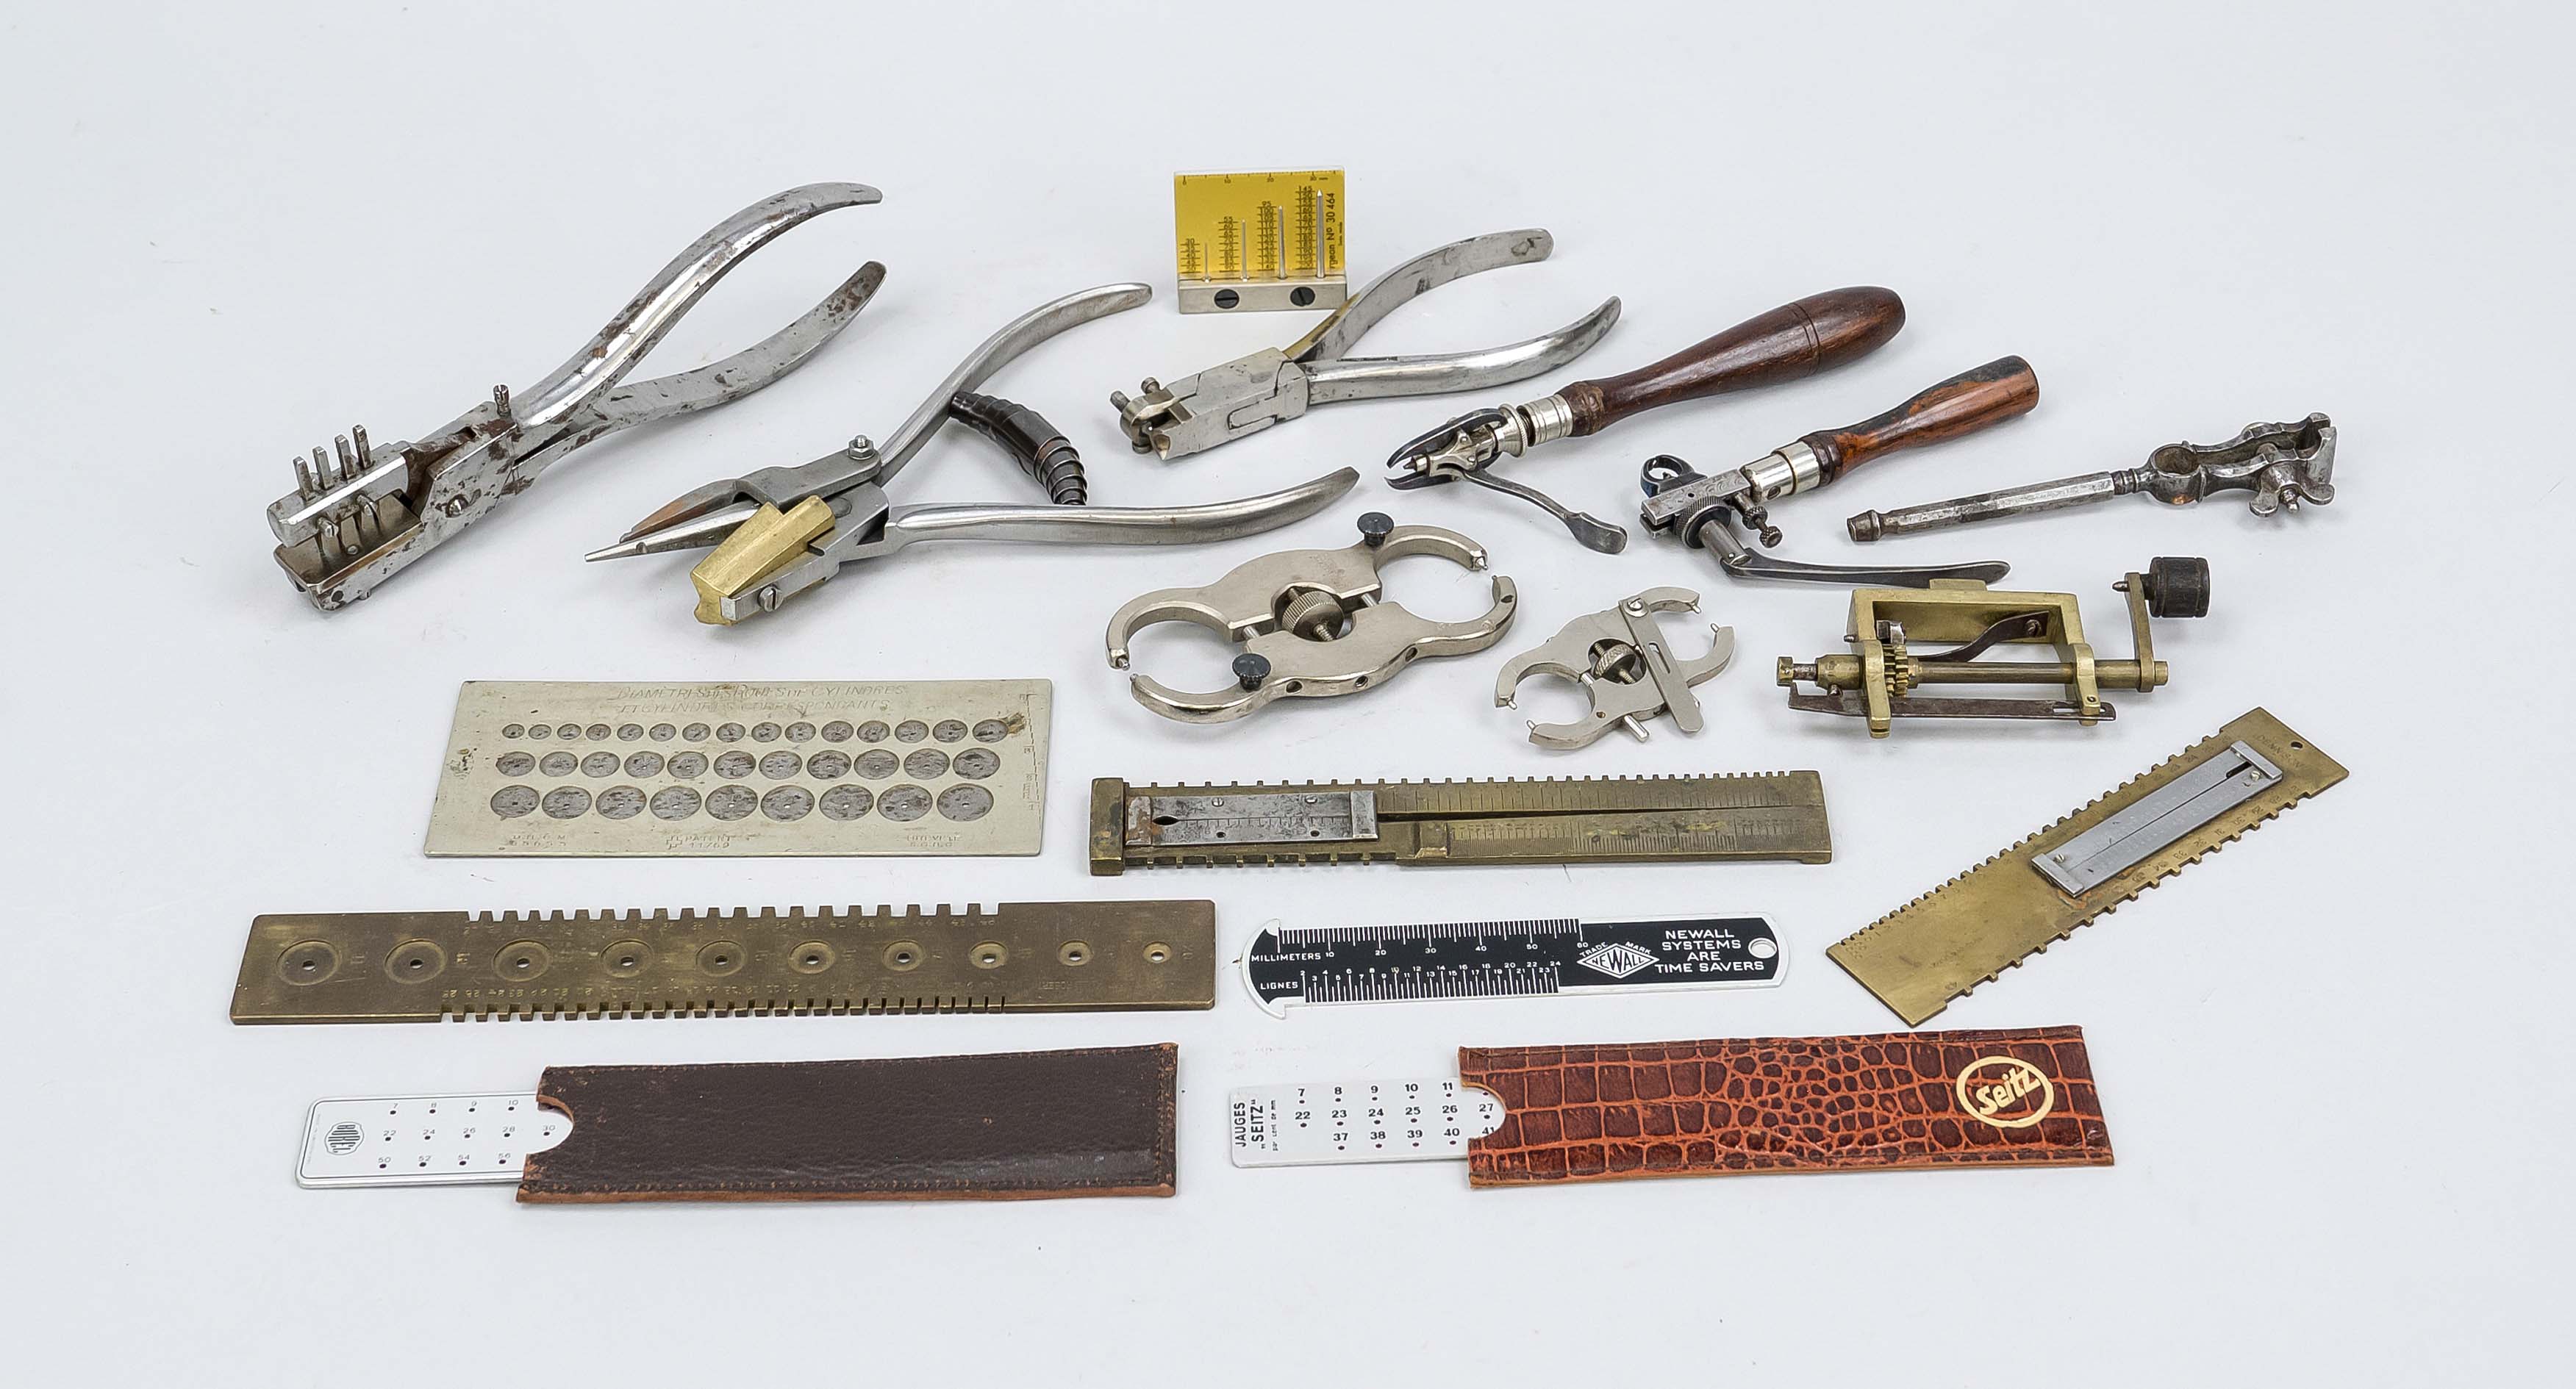 Watchmaker's tool kit, including hand lifter, Seitz jeweler's punch, pivot measure, hand measure,